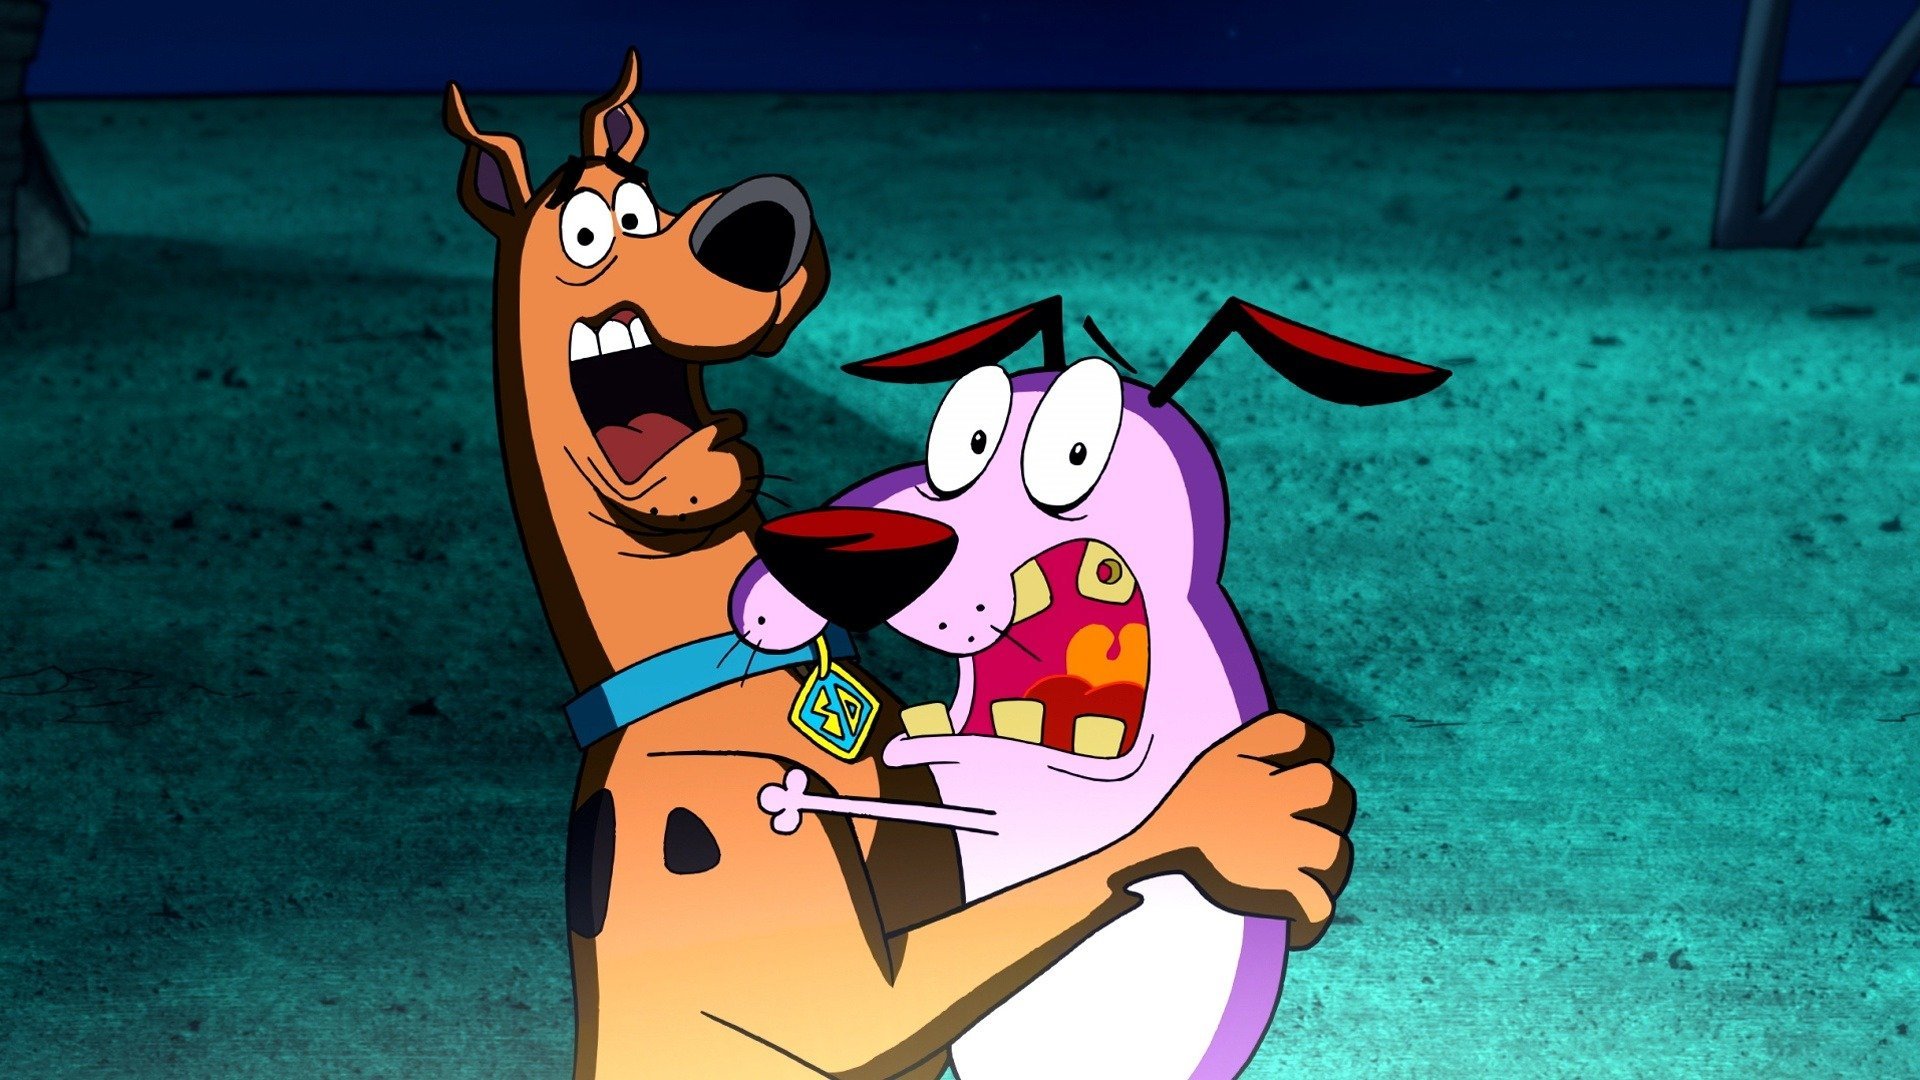 Straight Outta Nowhere: Scooby-Doo! Meets Courage the Cowardly Dog